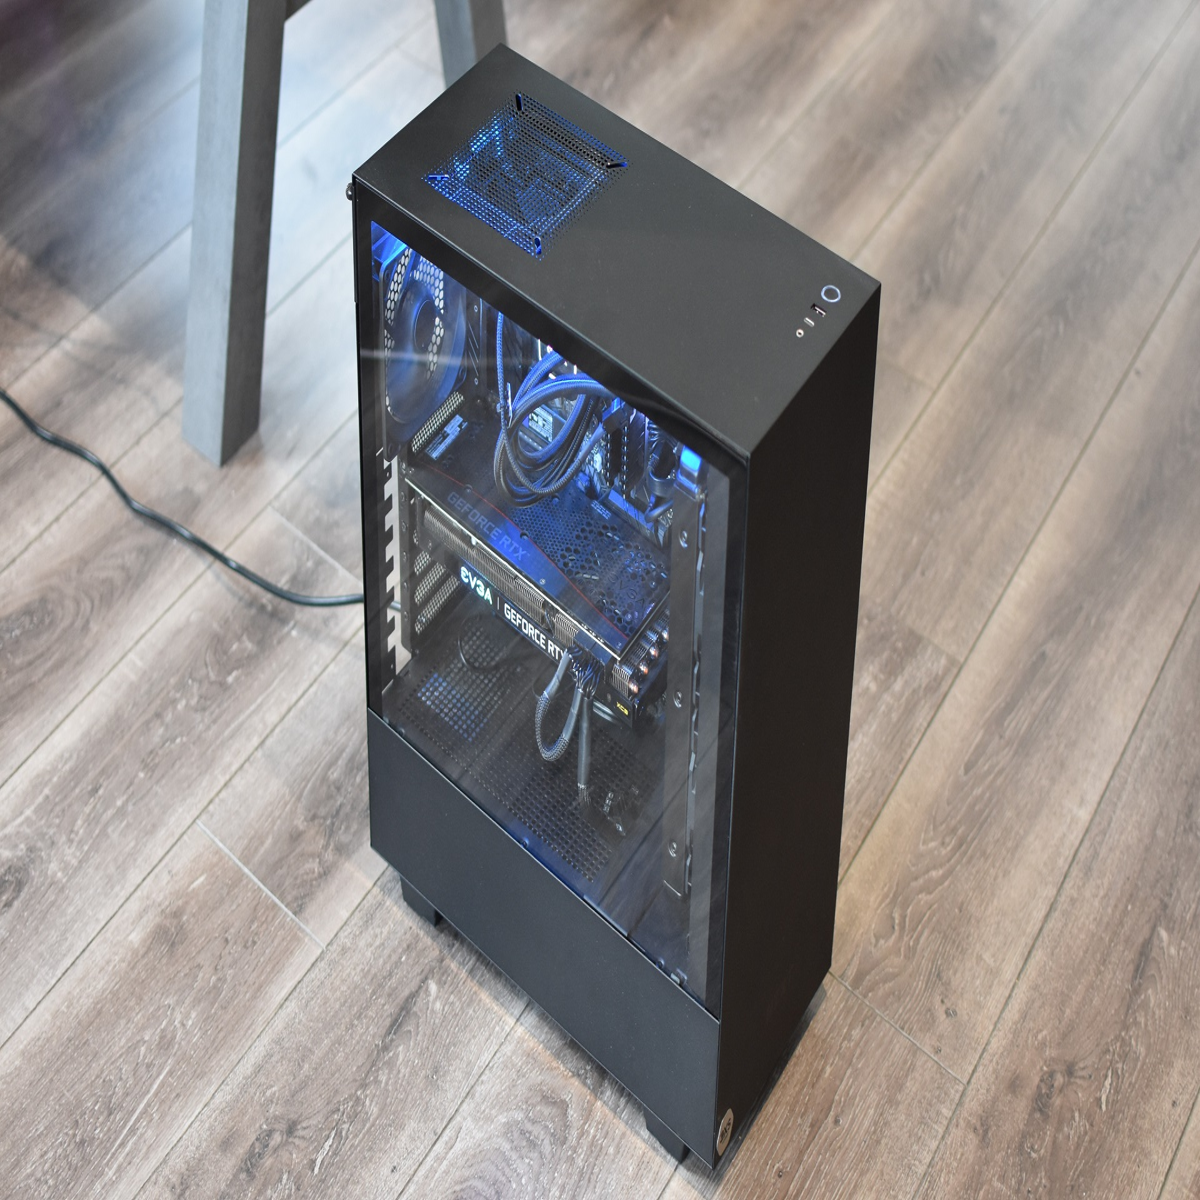 Pick up this stylish iBuypower RTX 3070 gaming PC with a price slash as we  close in on MW3 - PC Guide